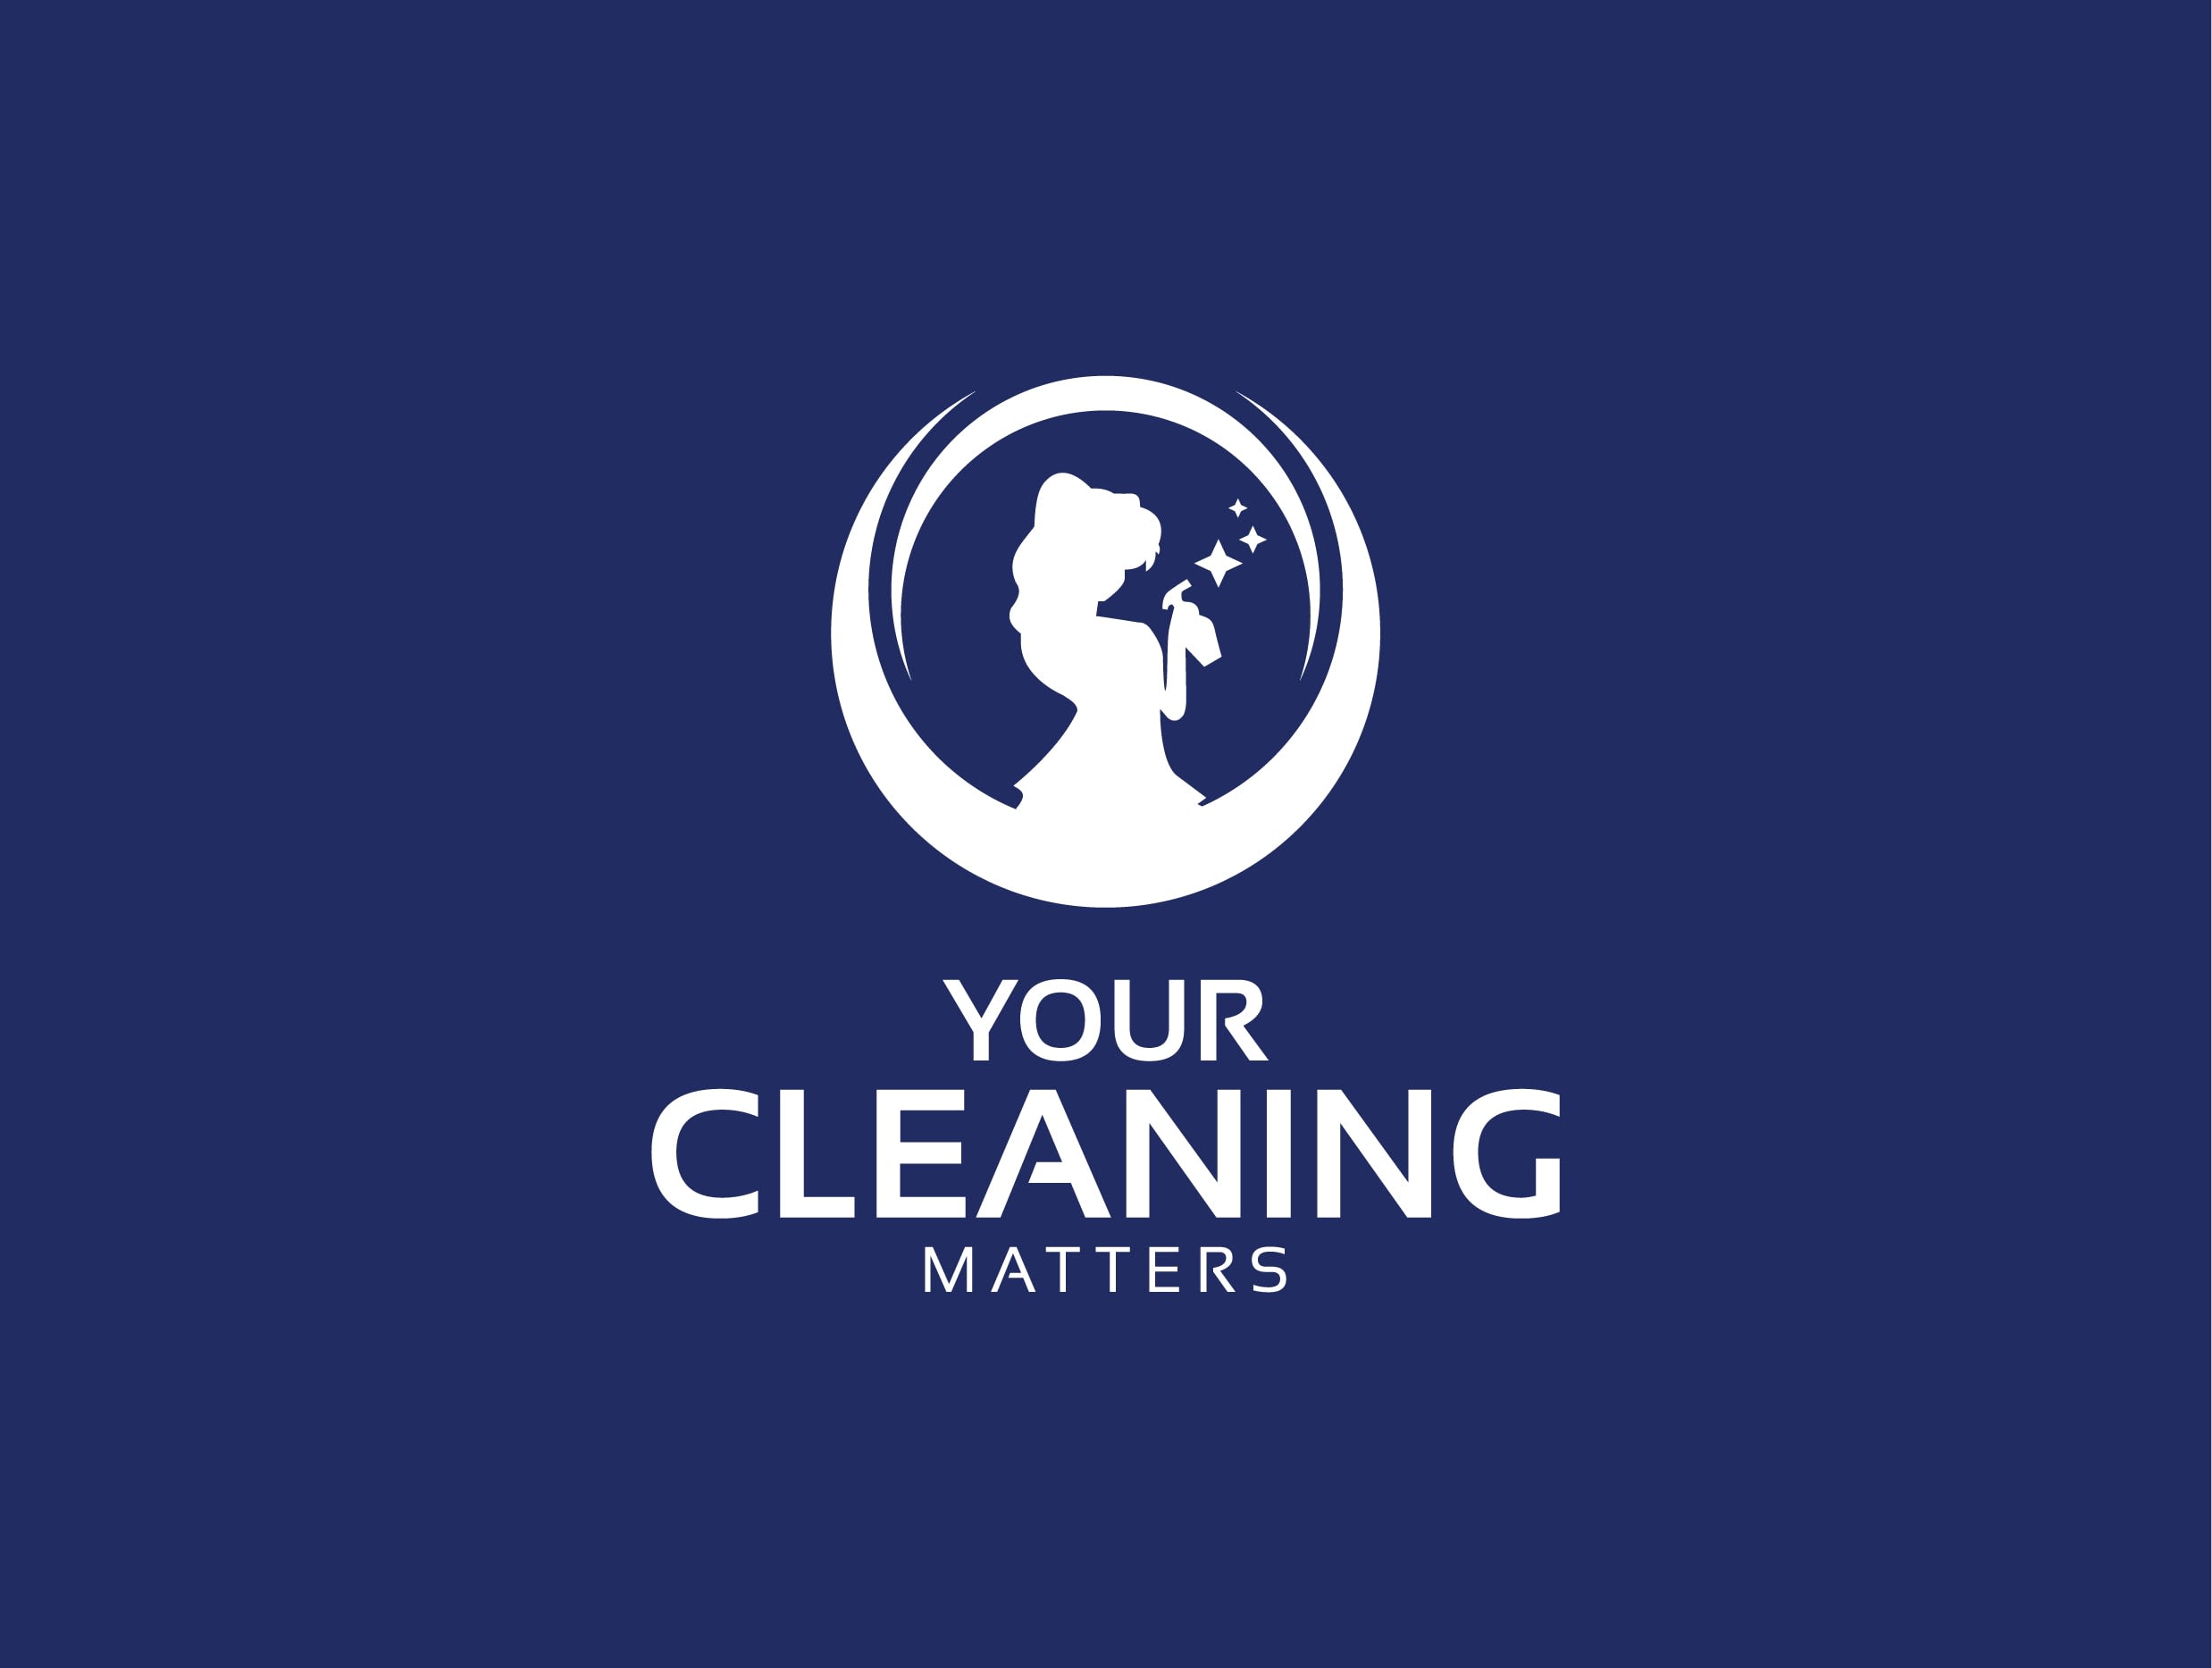 Your Cleaning Matters